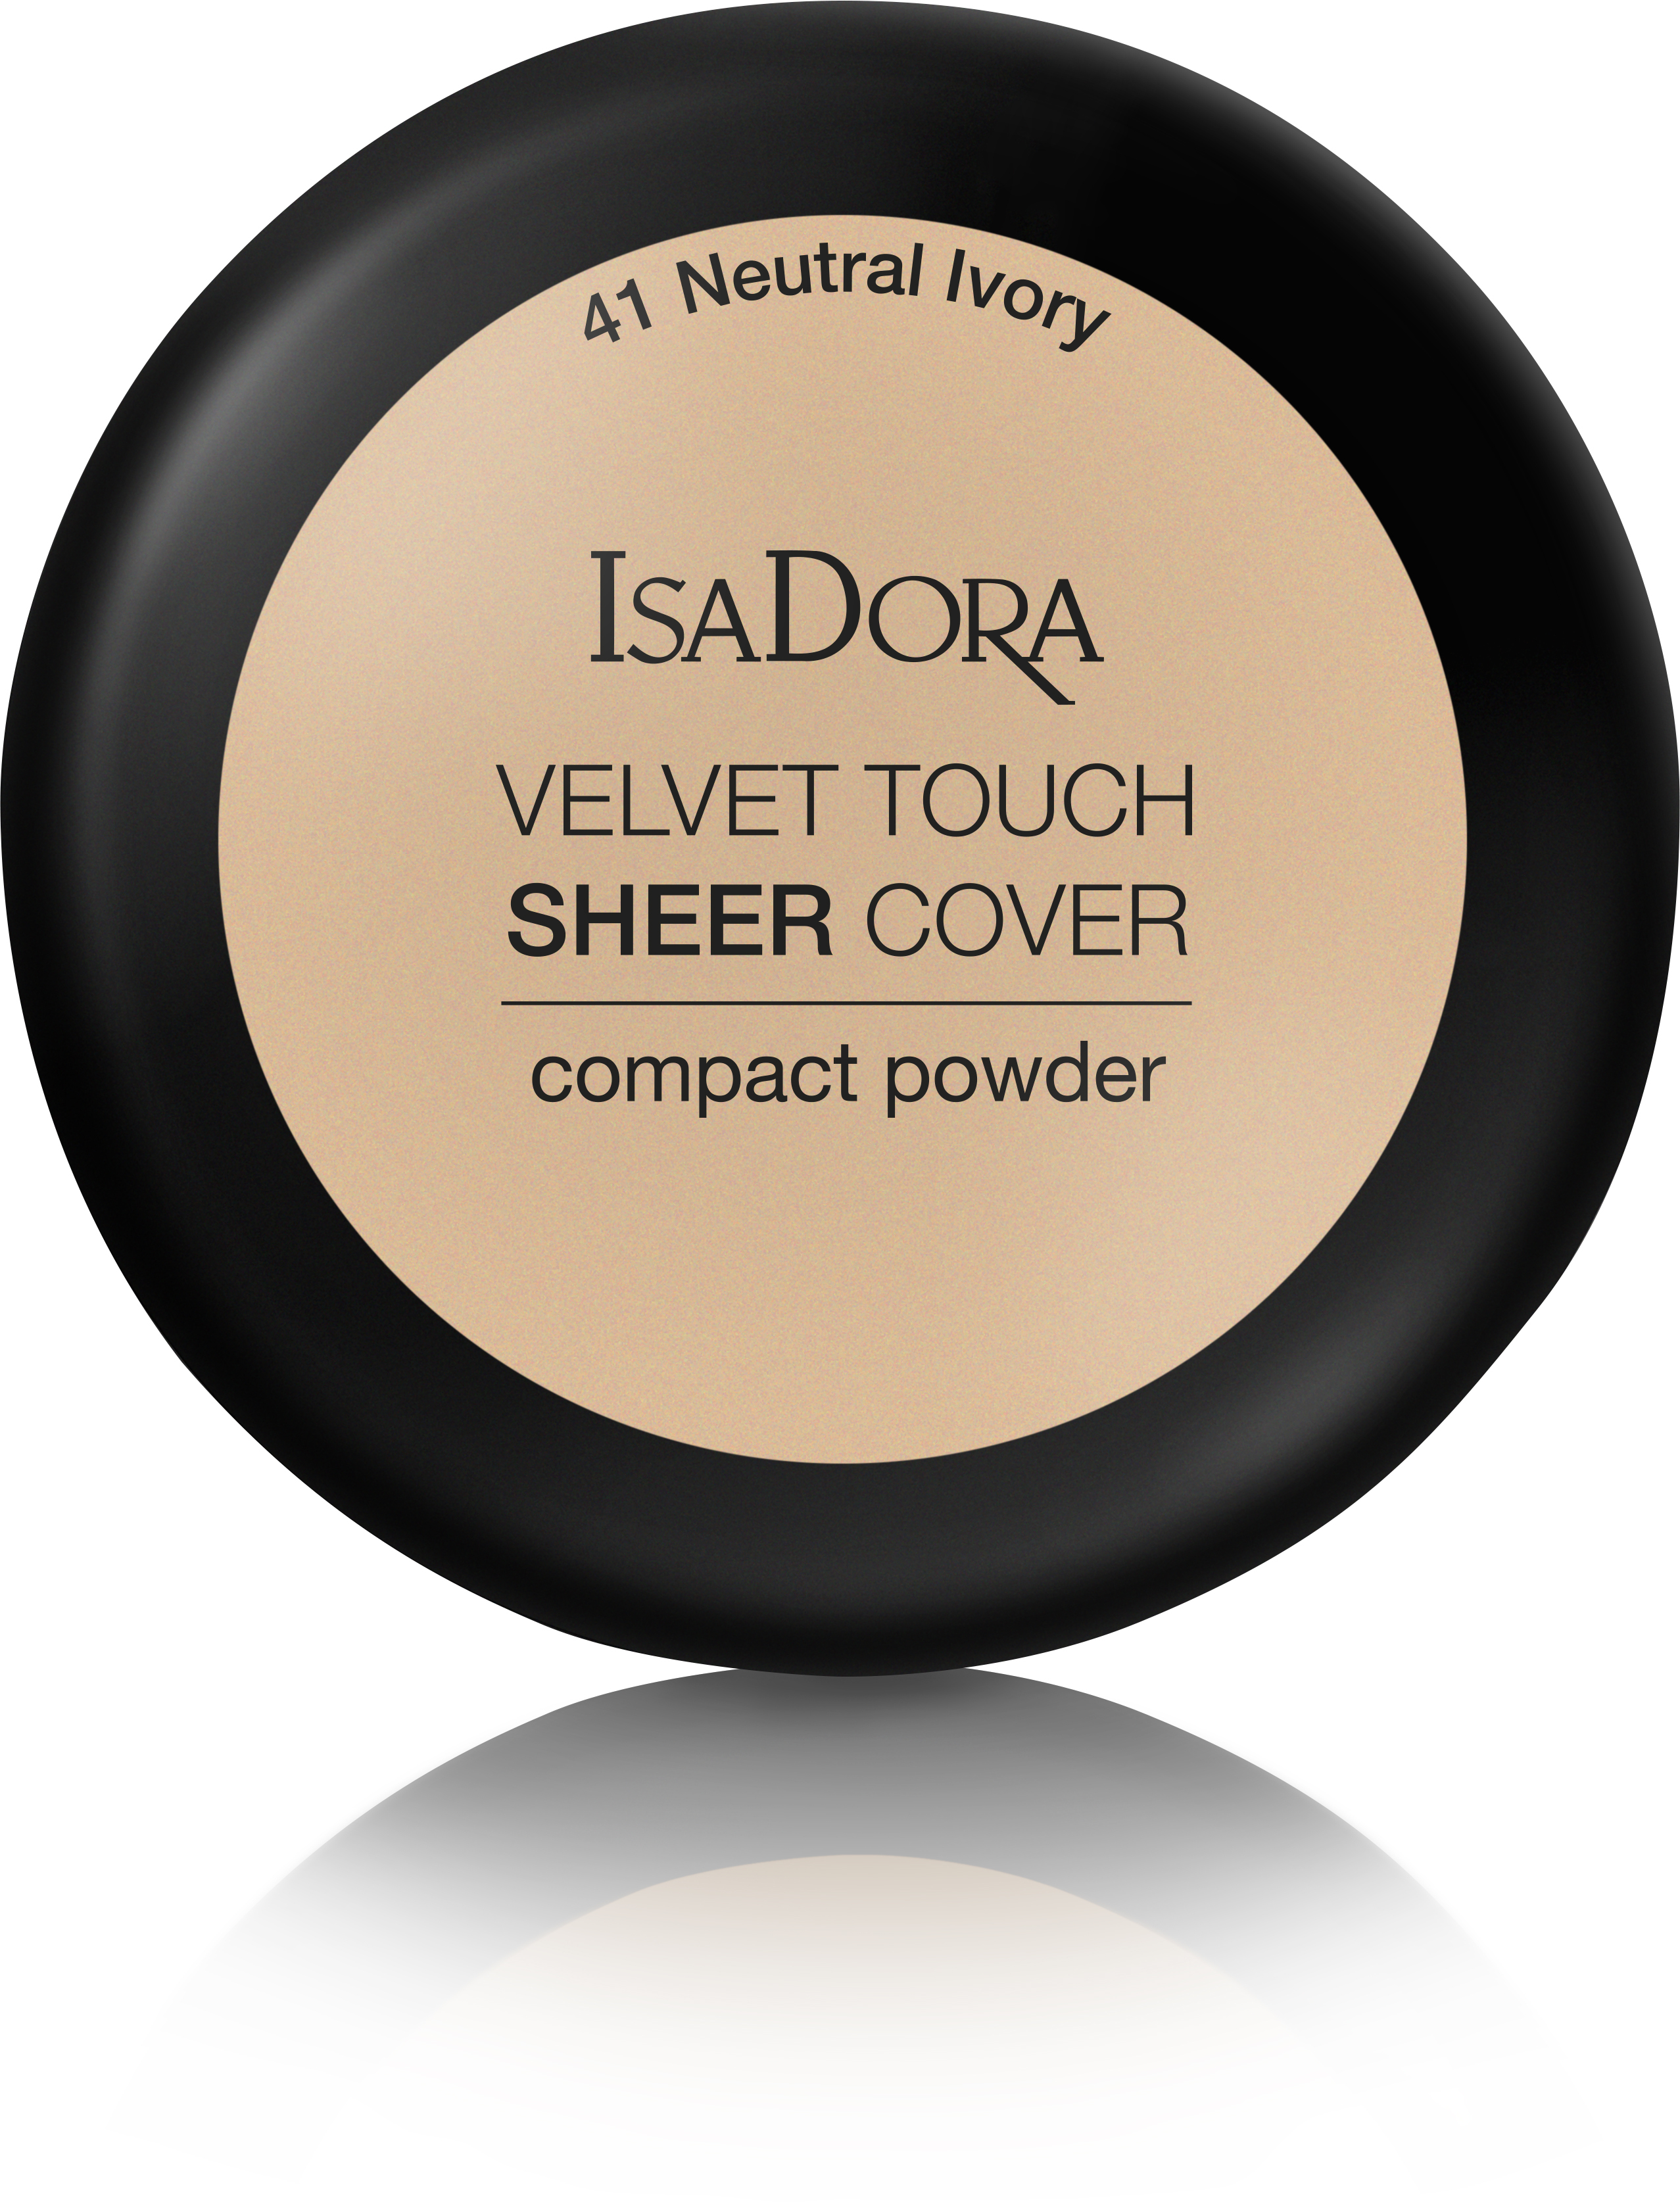 IsaDora 41 Neutral Ivory Velvet Touch Sheer Cover Compact